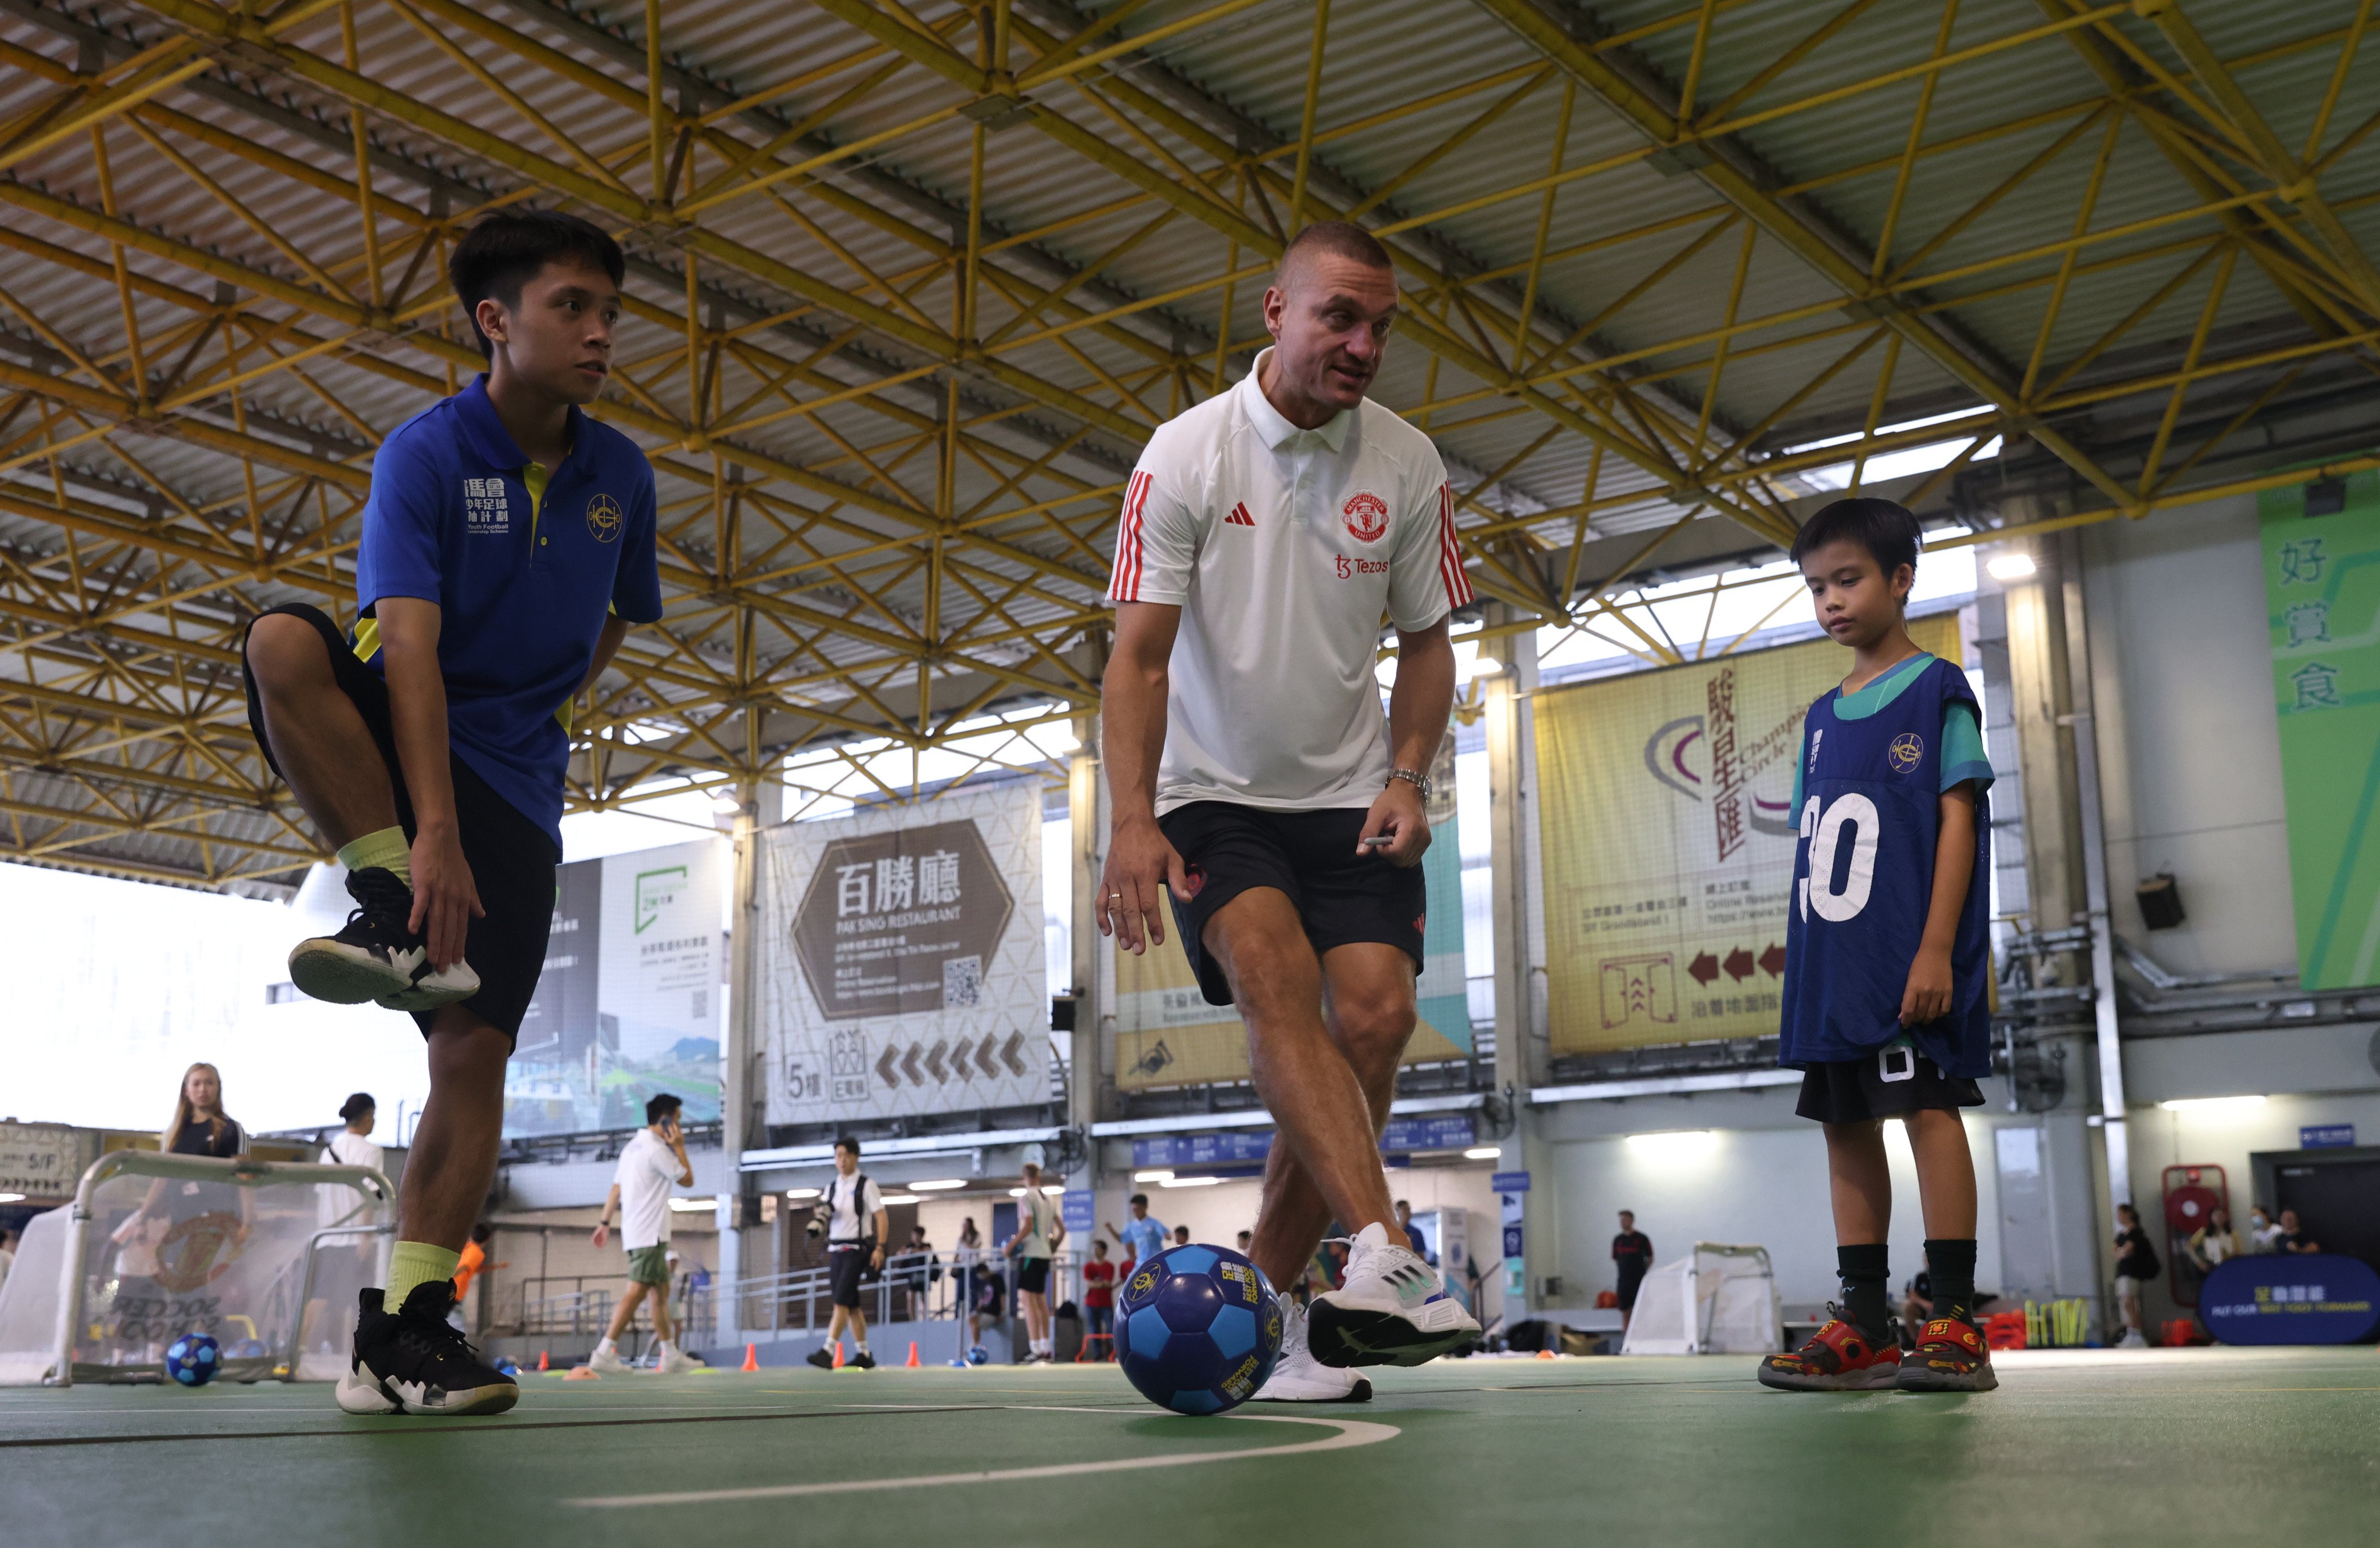 Manchester United legend Nemanja Vidic, who was in Hong Kong last week, recently completed his Uefa coaching badges as he looks for a new role in the game. Photos: Yik Yeung-man.